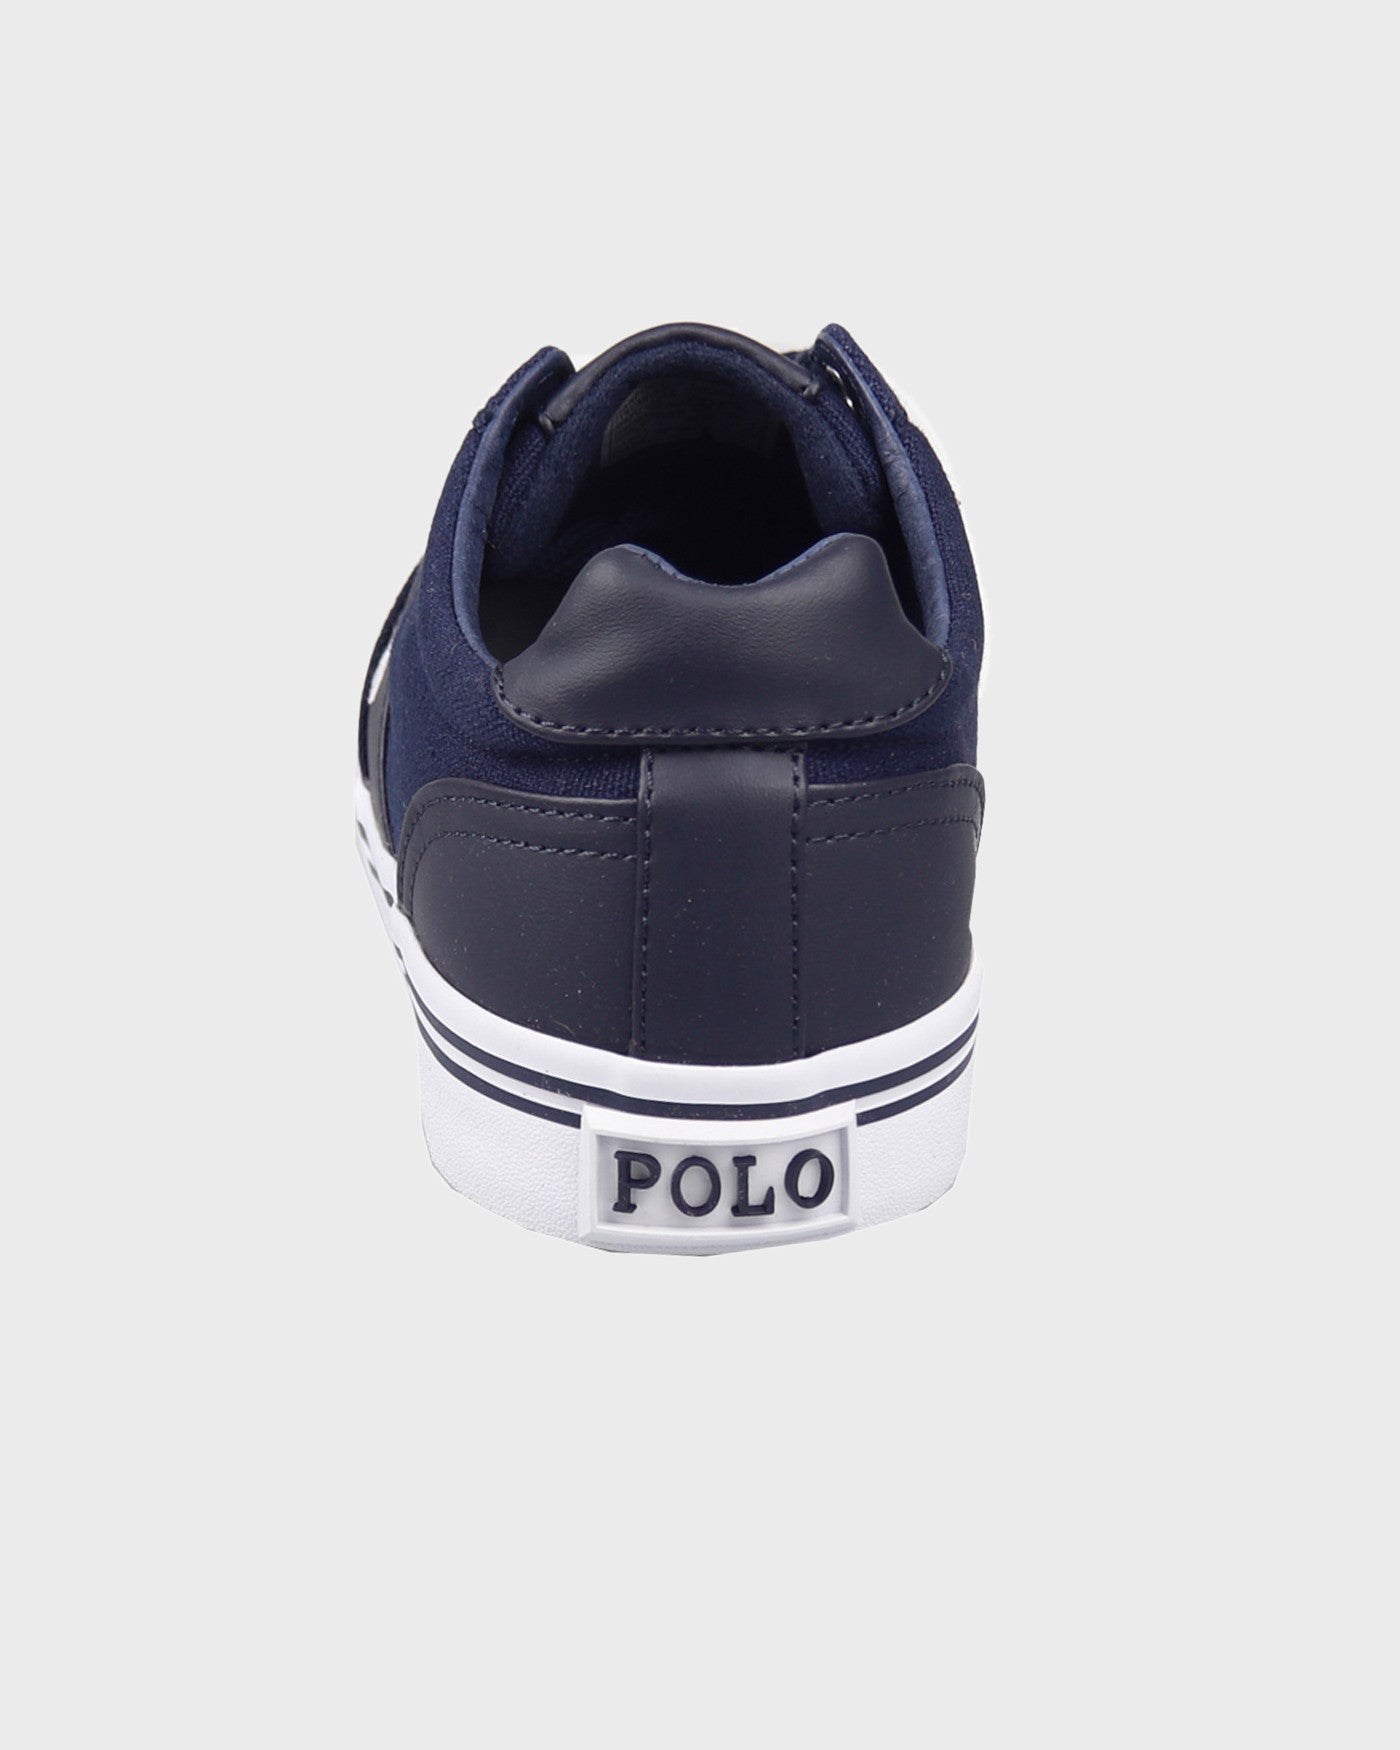 POLO RALPH NAVY CASUAL SHOE - Ransoms